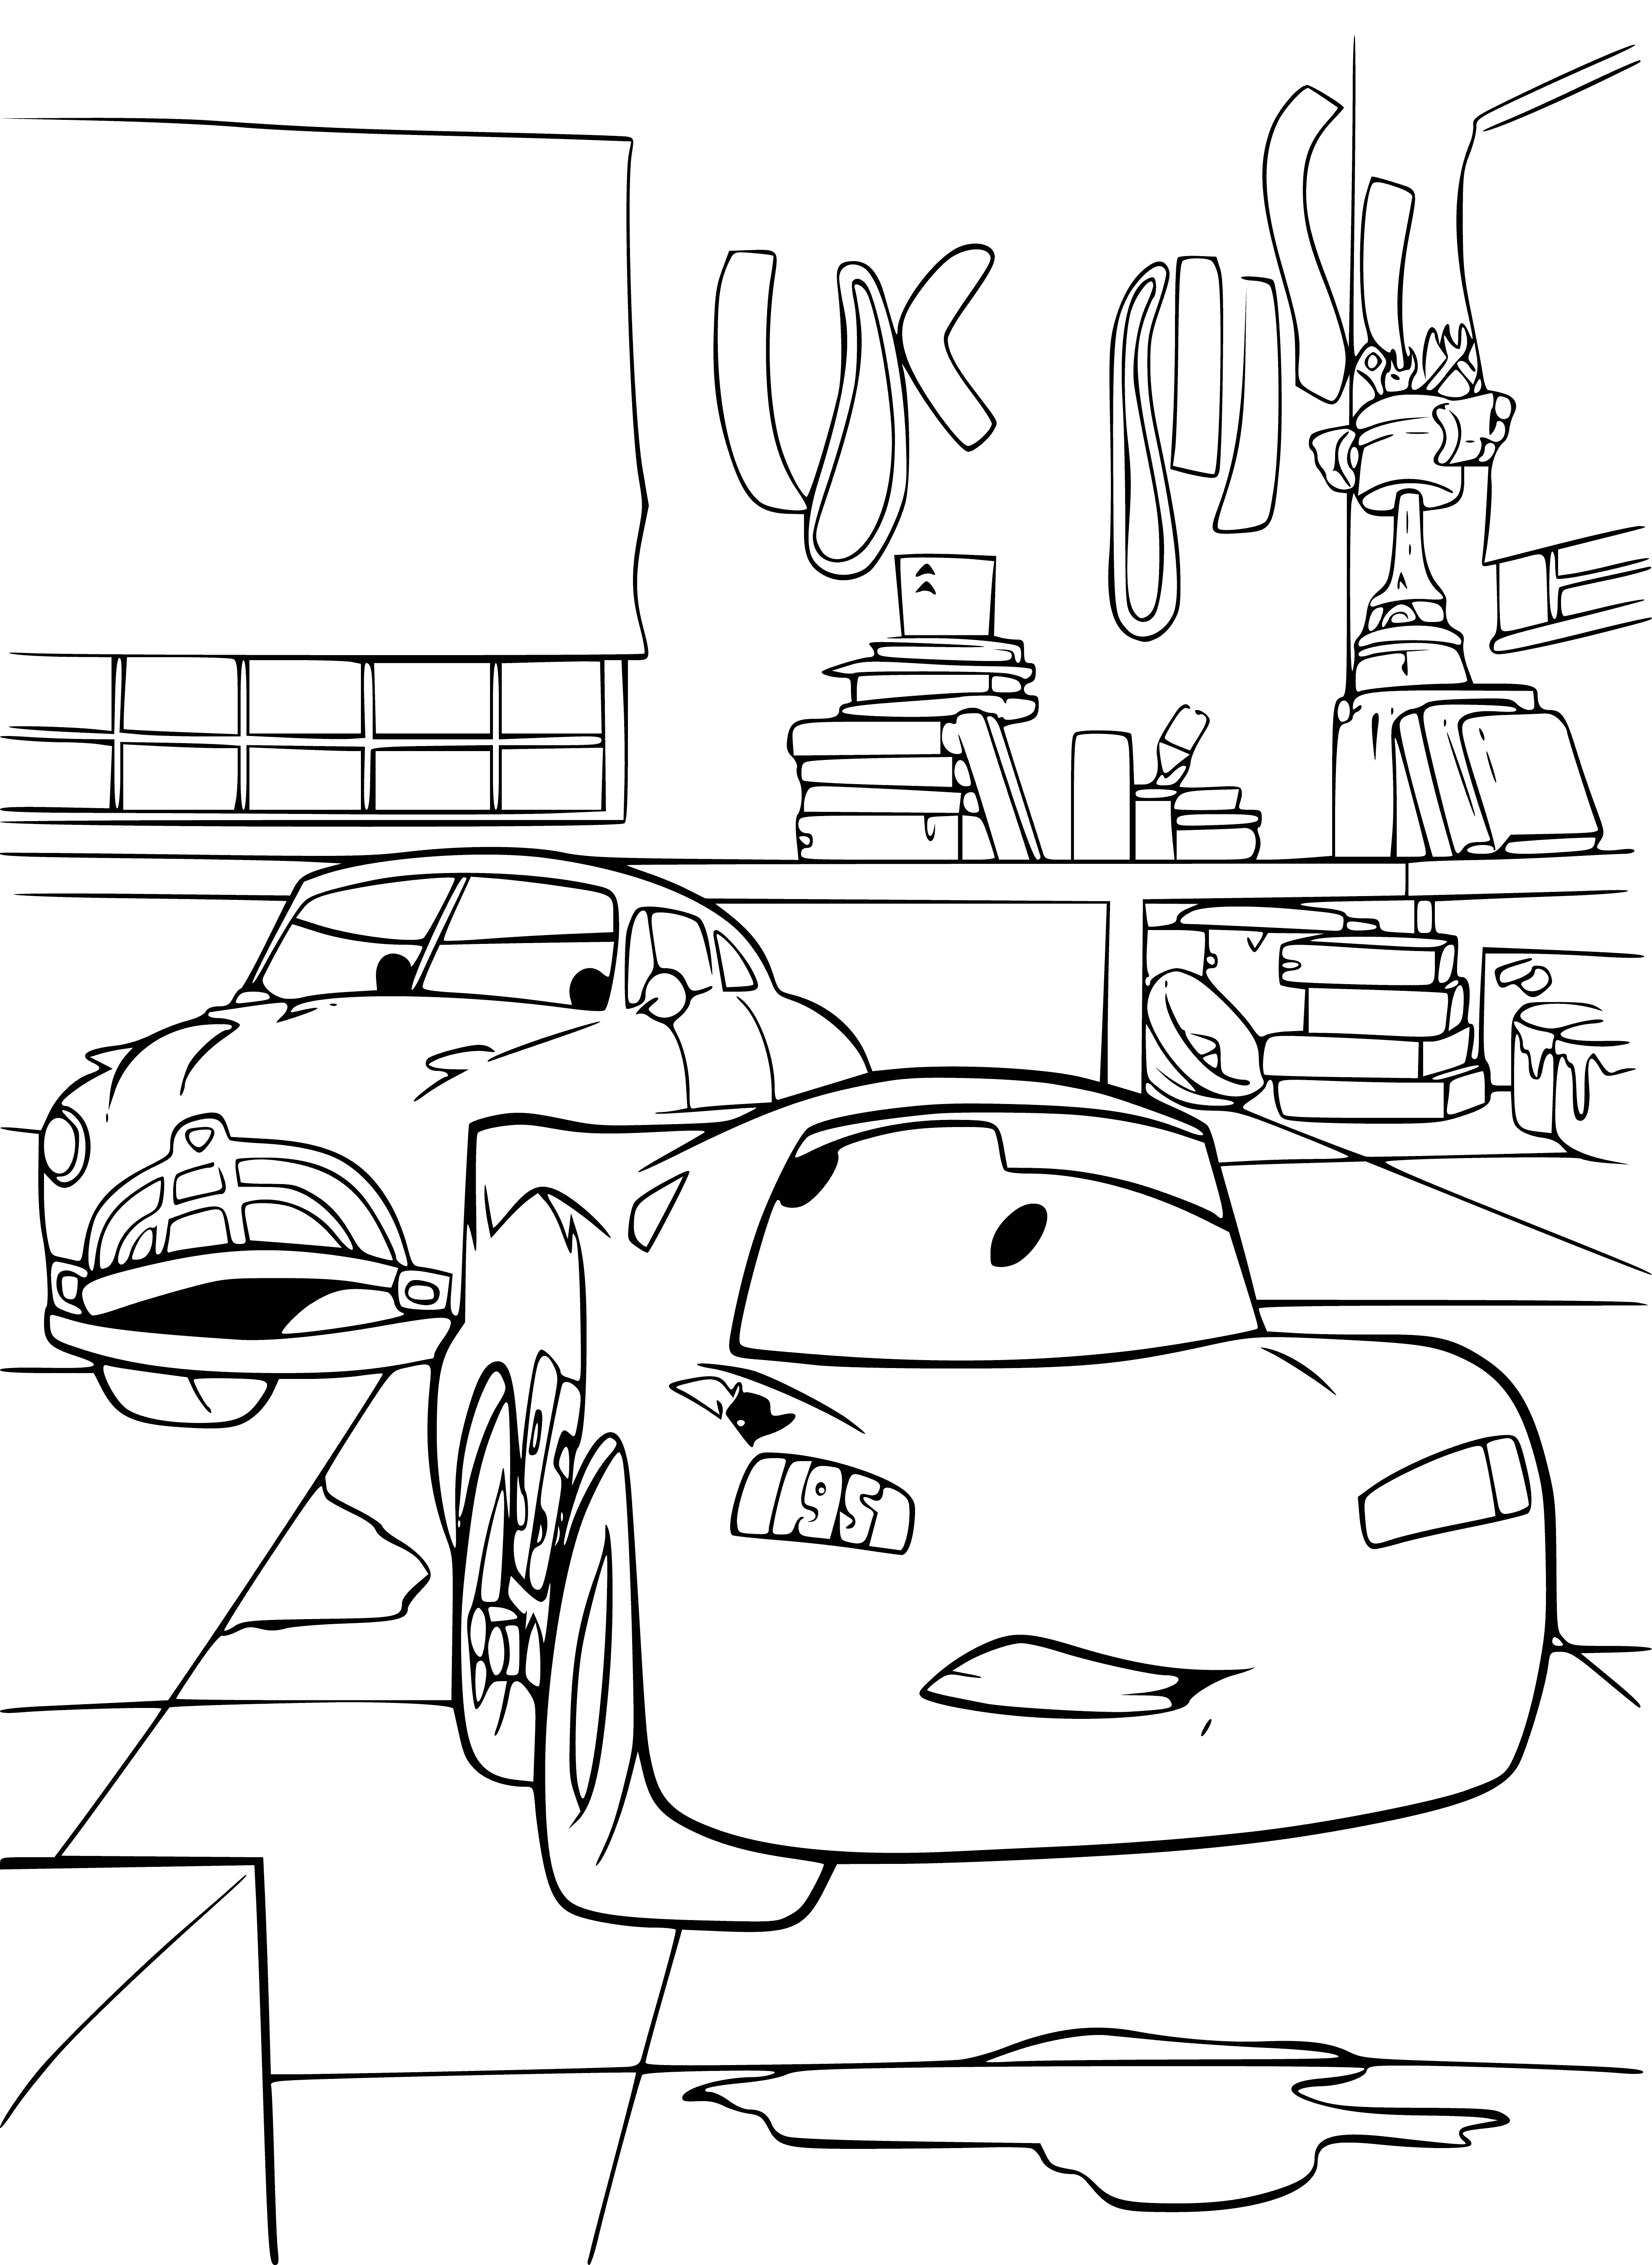 coloring page: Doc Hudson is a white car w/ blue stripes & blue racing stripe, roof & hubcaps. Lightning McQueen is a red car w/ yellow stripes, lightning bolt, headlights & roof.